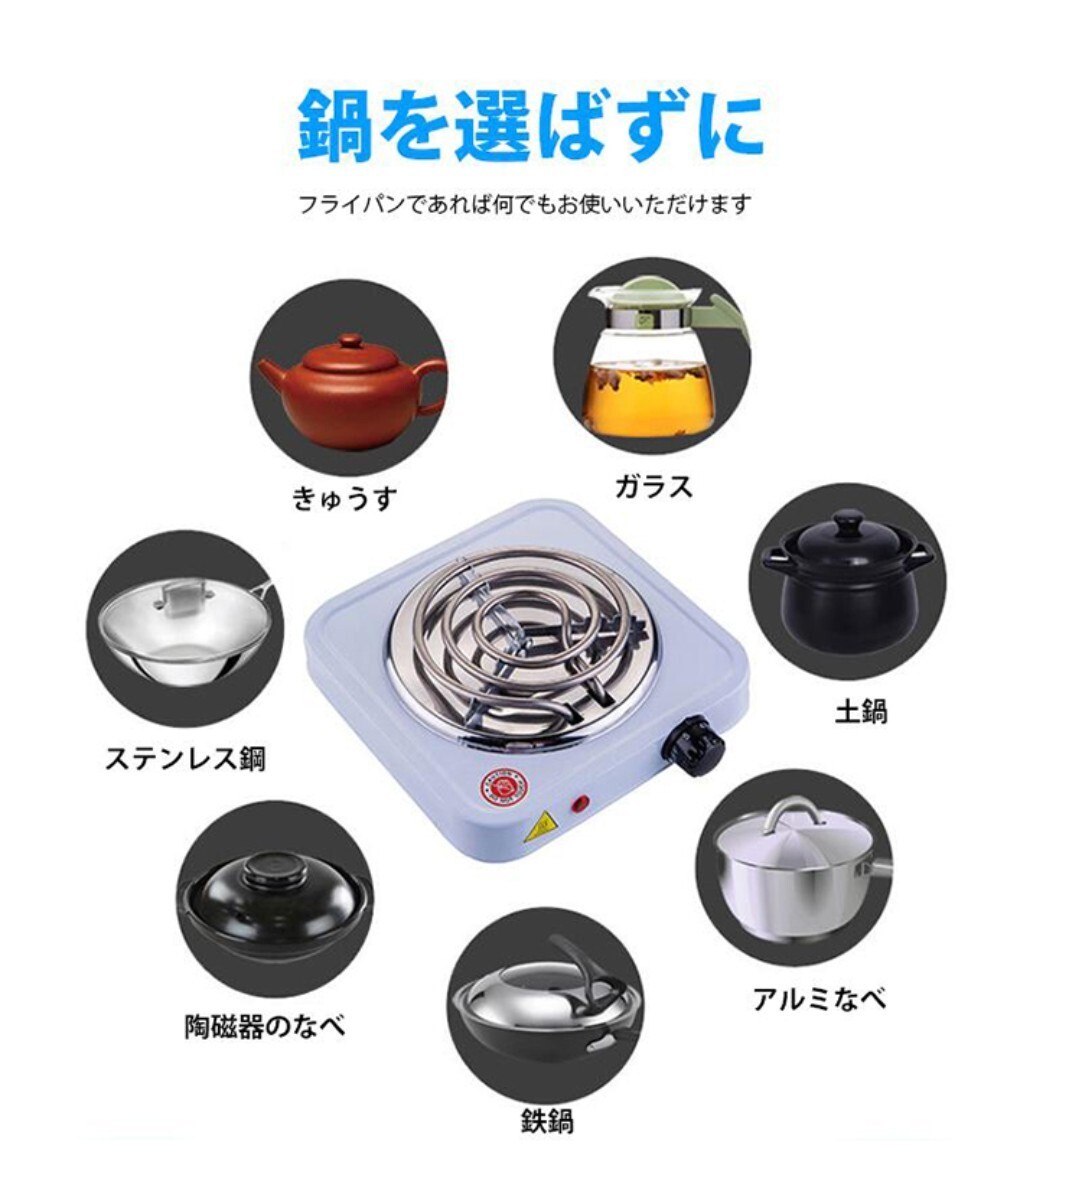  electric portable cooking stove outdoor 1000W desk home use ih cooking heater black 